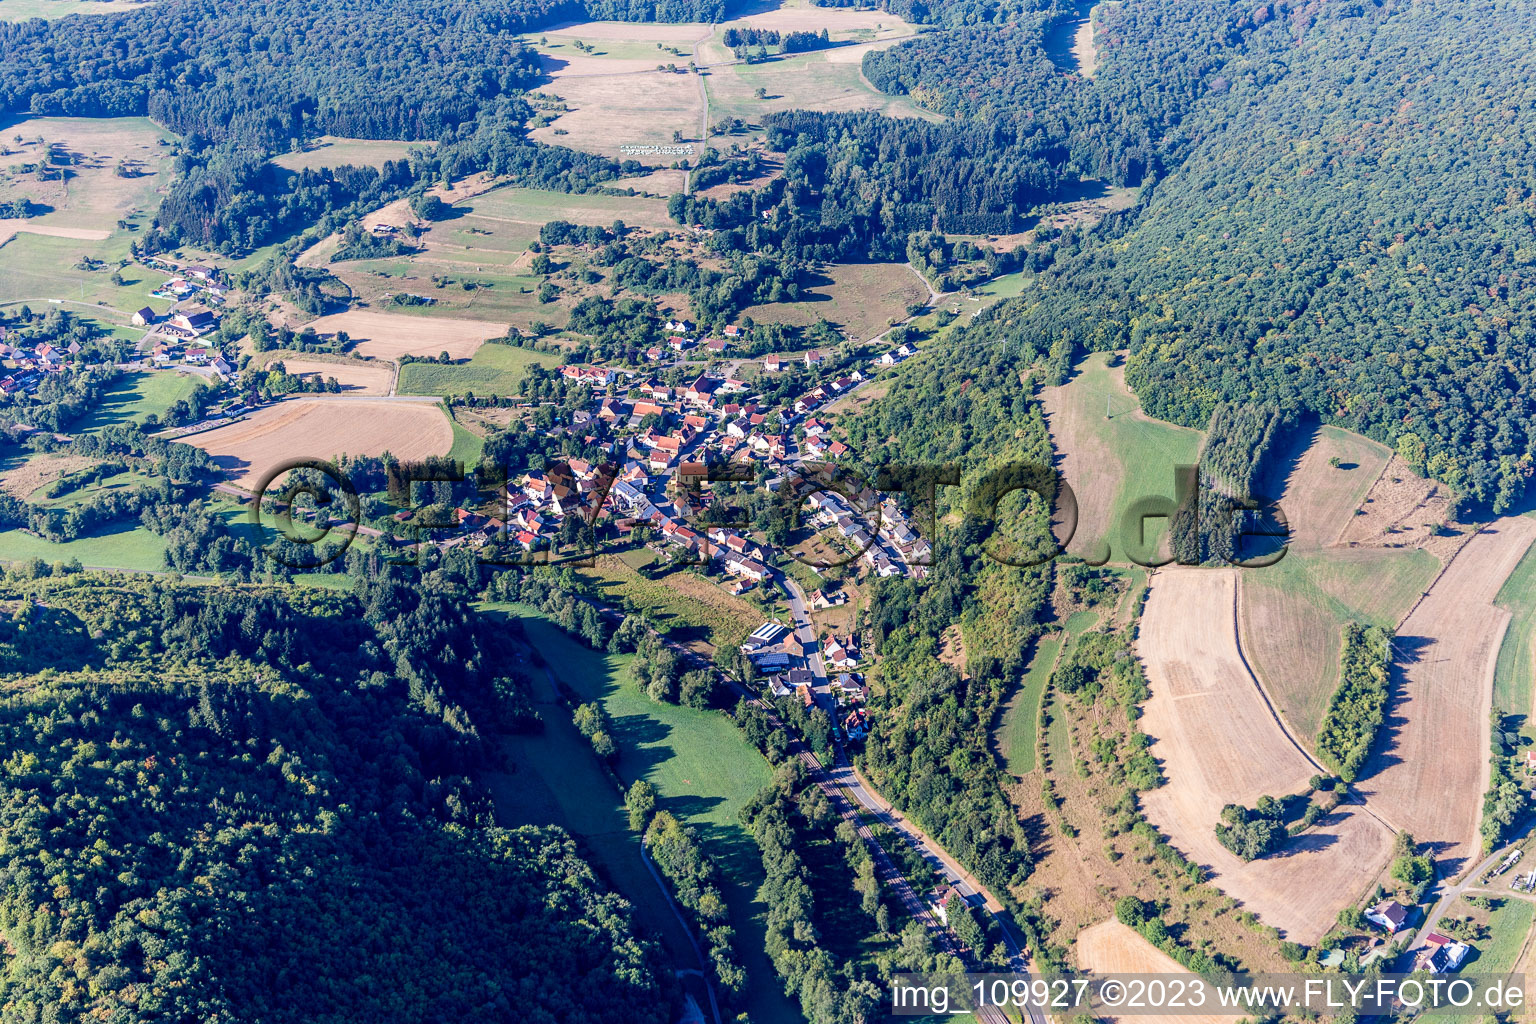 Mannweiler-Cölln in the state Rhineland-Palatinate, Germany from above